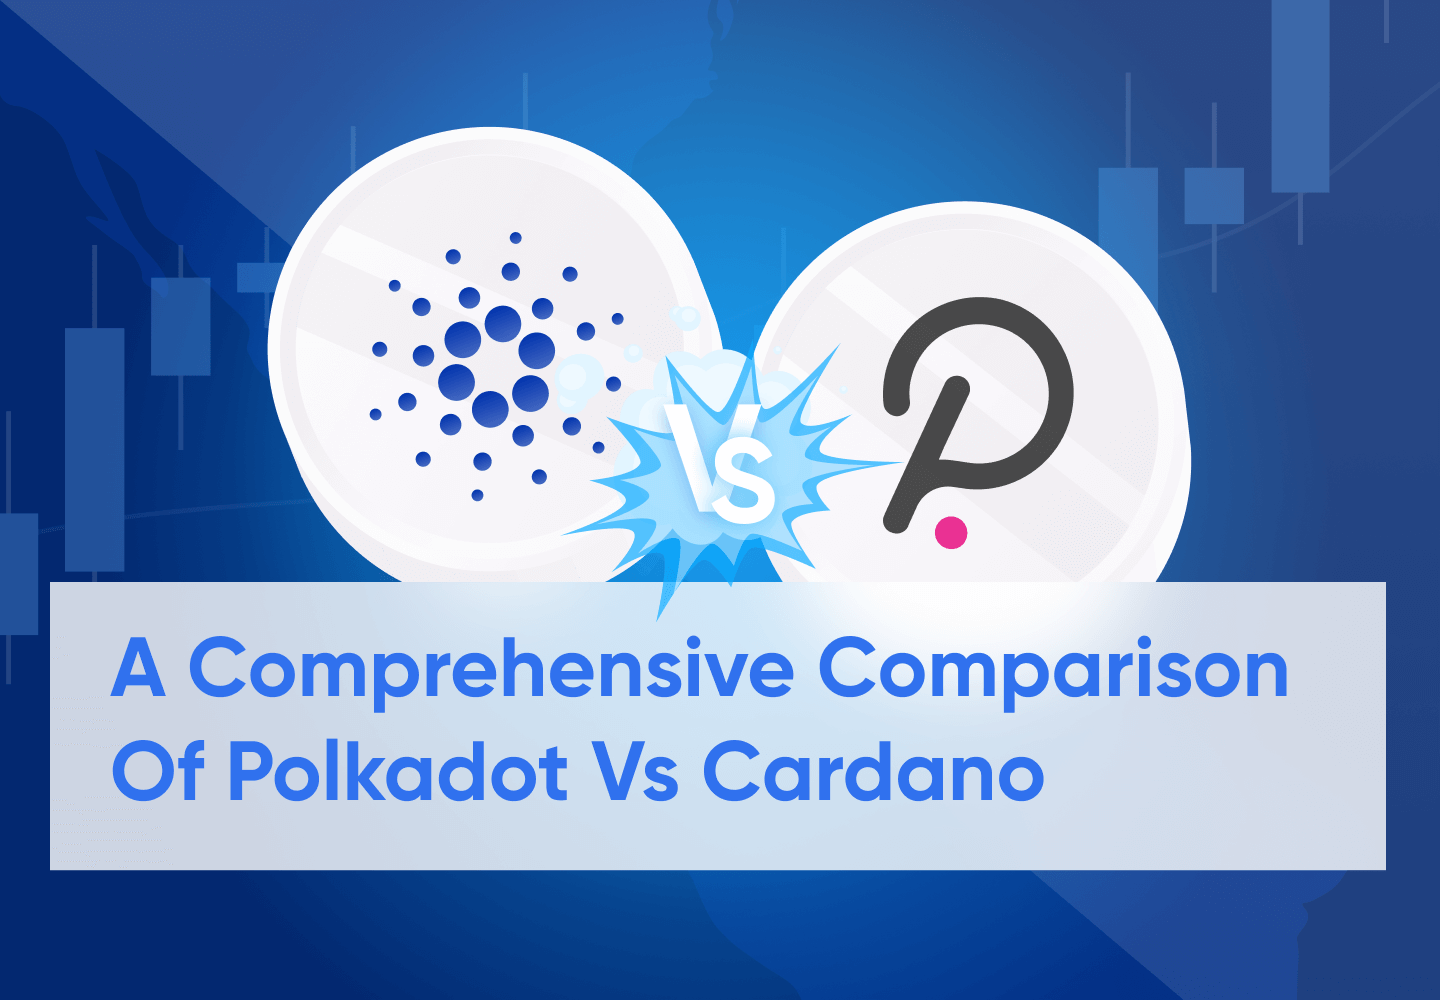 Polkadot vs Cardano: What is the Difference?